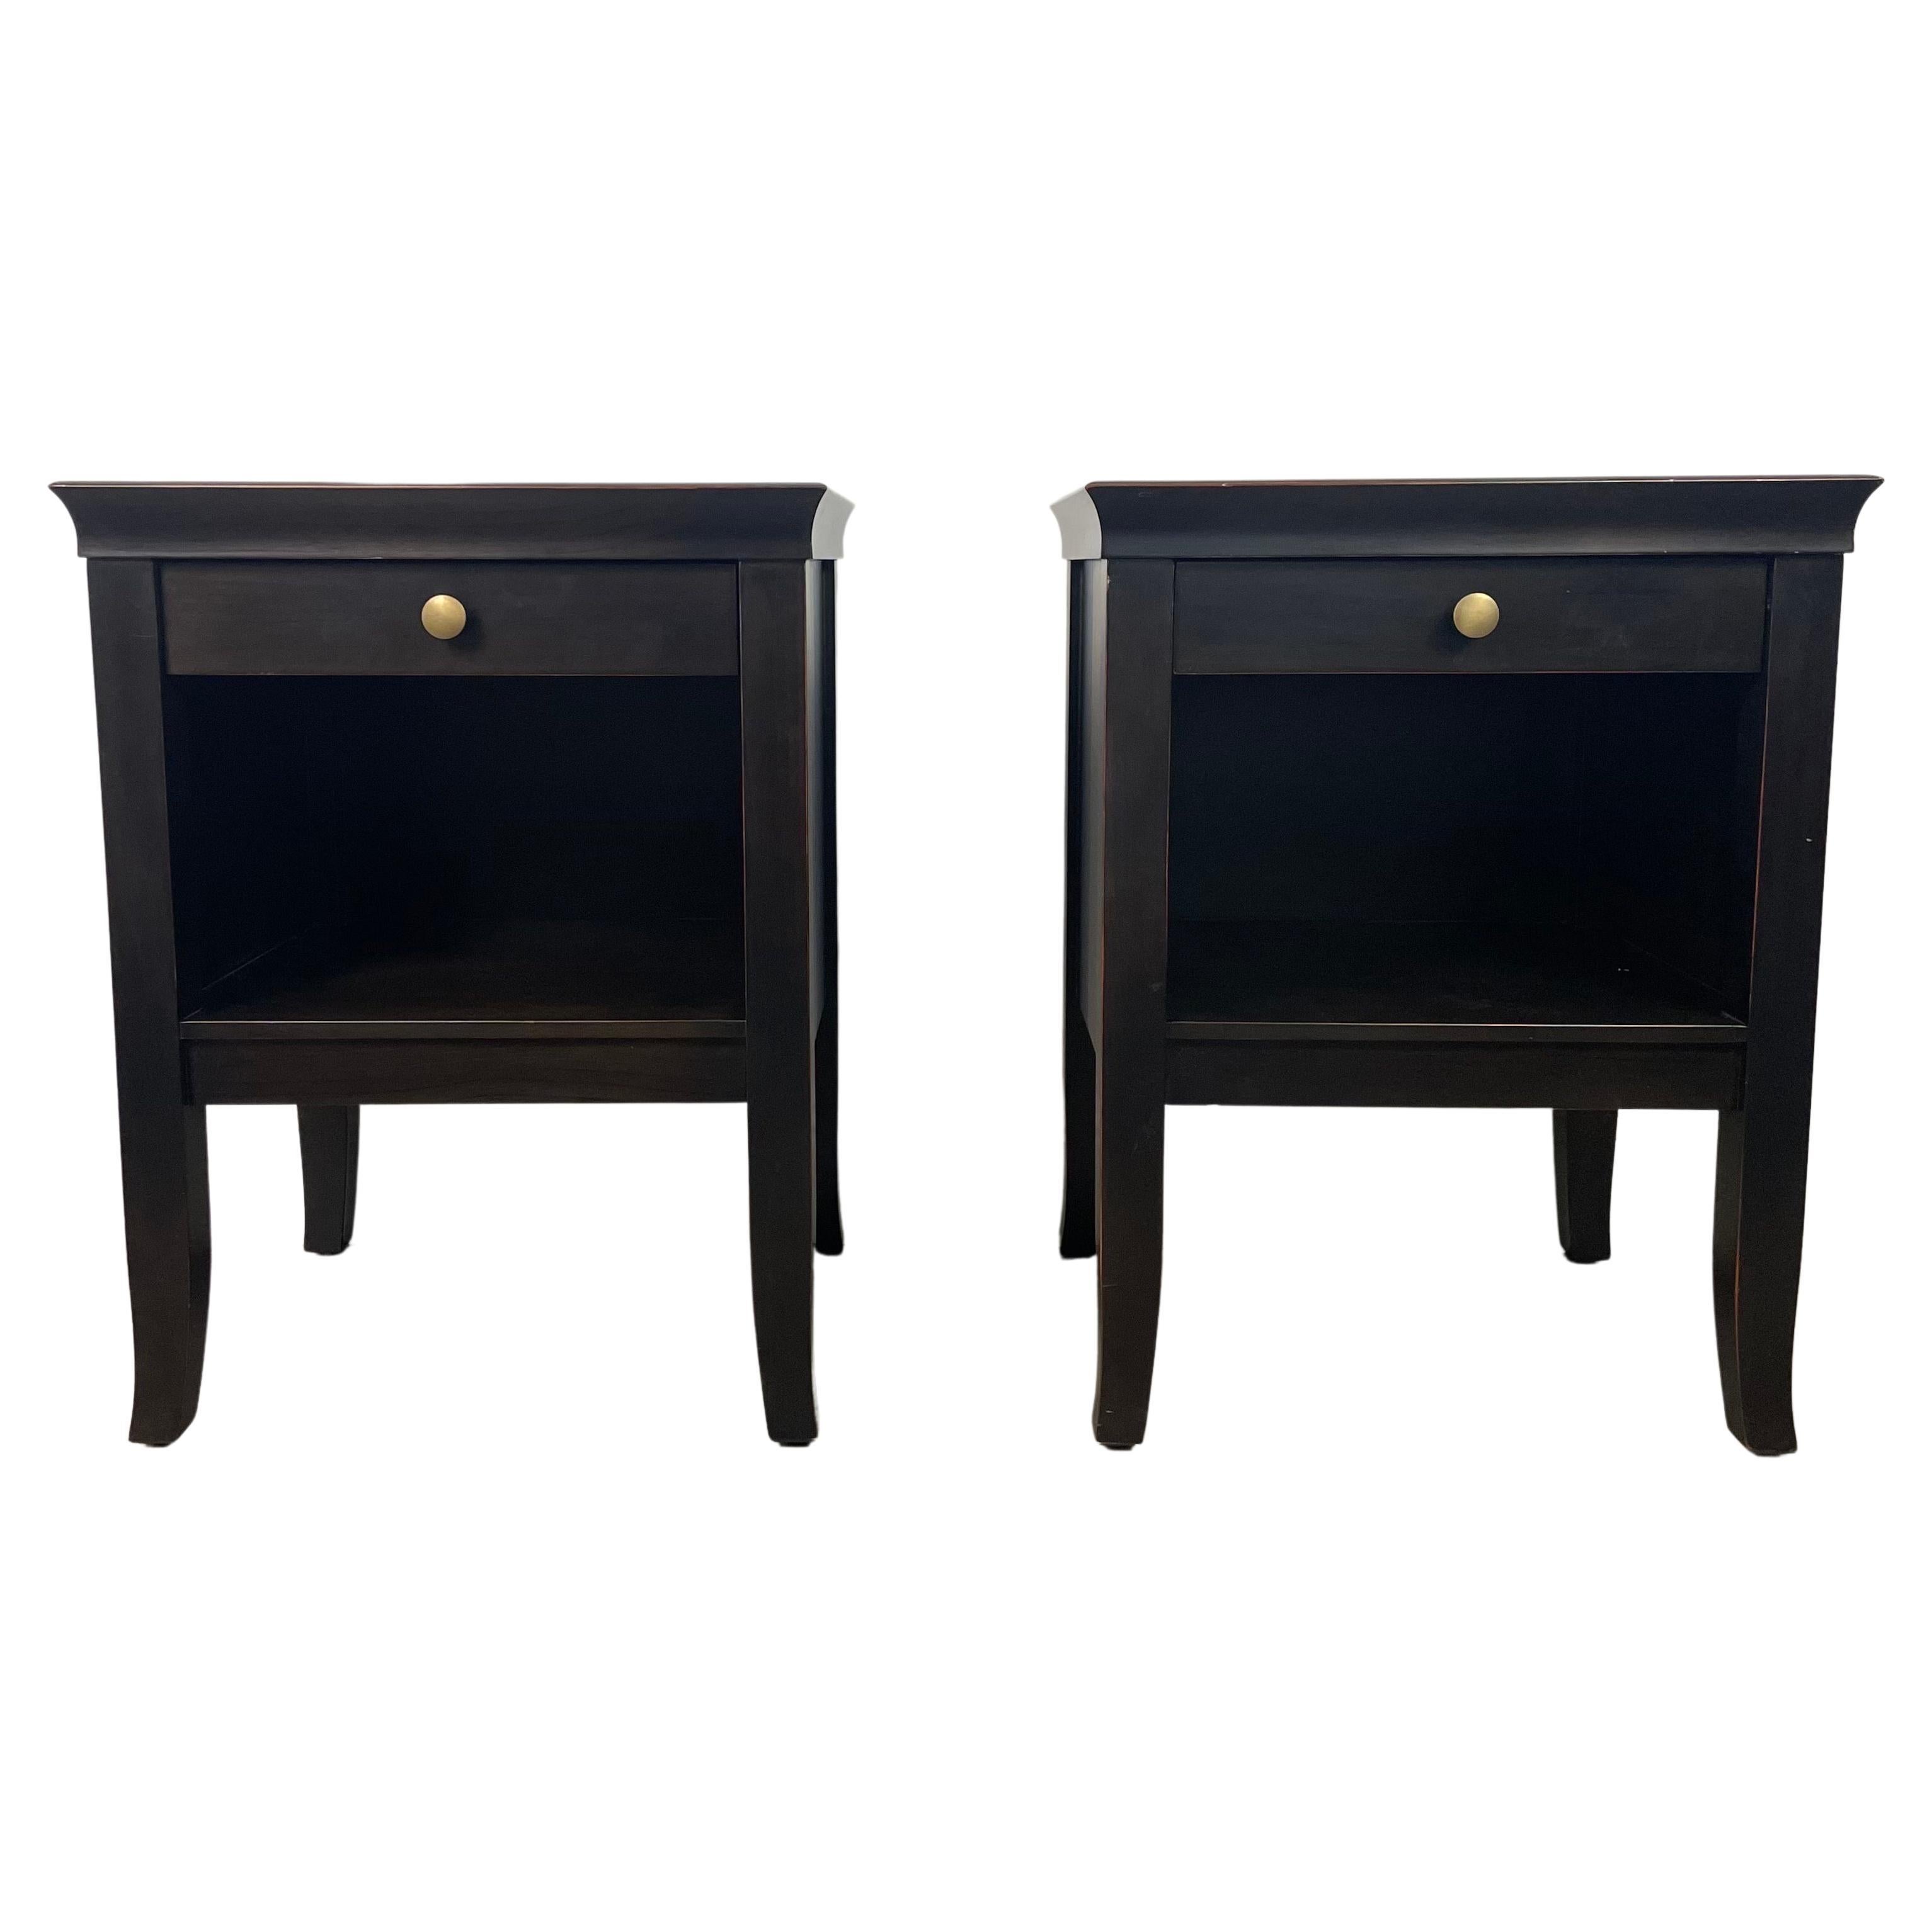 Pair of bedside tables nightsand black lacquered wood 1950's vintage Asian style For Sale